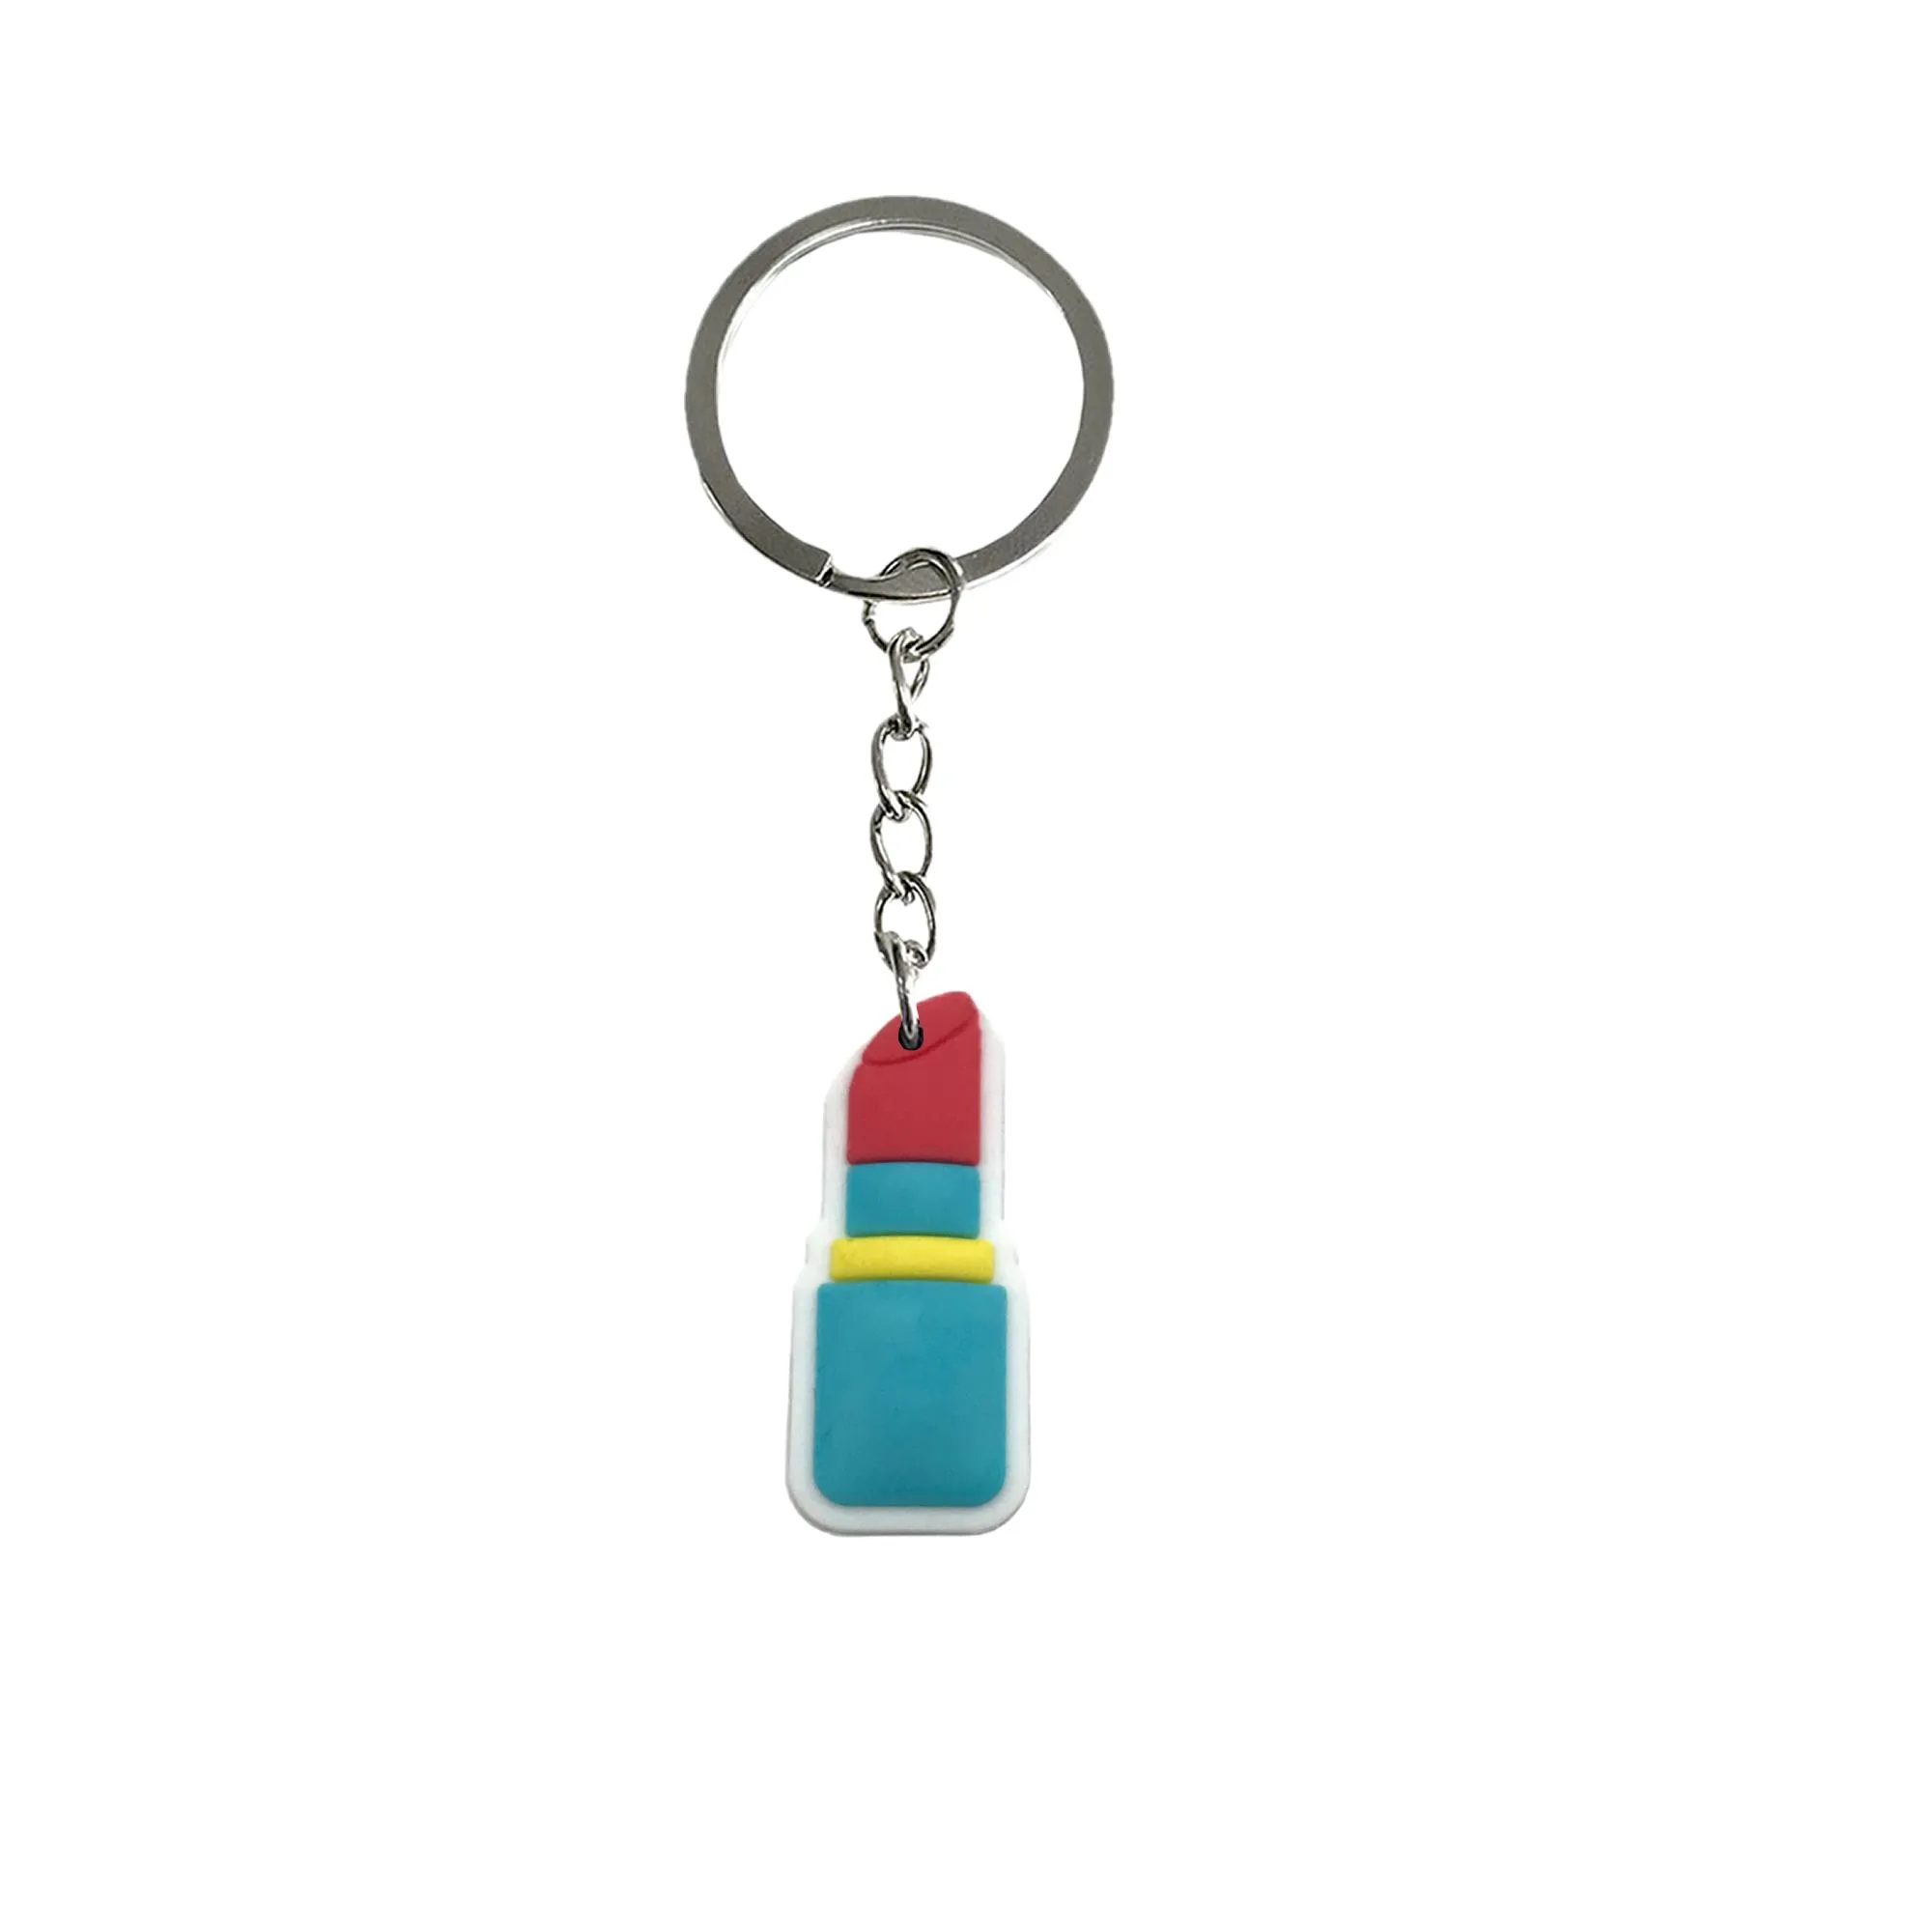 new cosmetics series keychain key chain for kid boy girl party favors gift keychains couple backpack chains women keyring suitable schoolbag car charms ring christmas fans shoulder bag pendant accessories charm